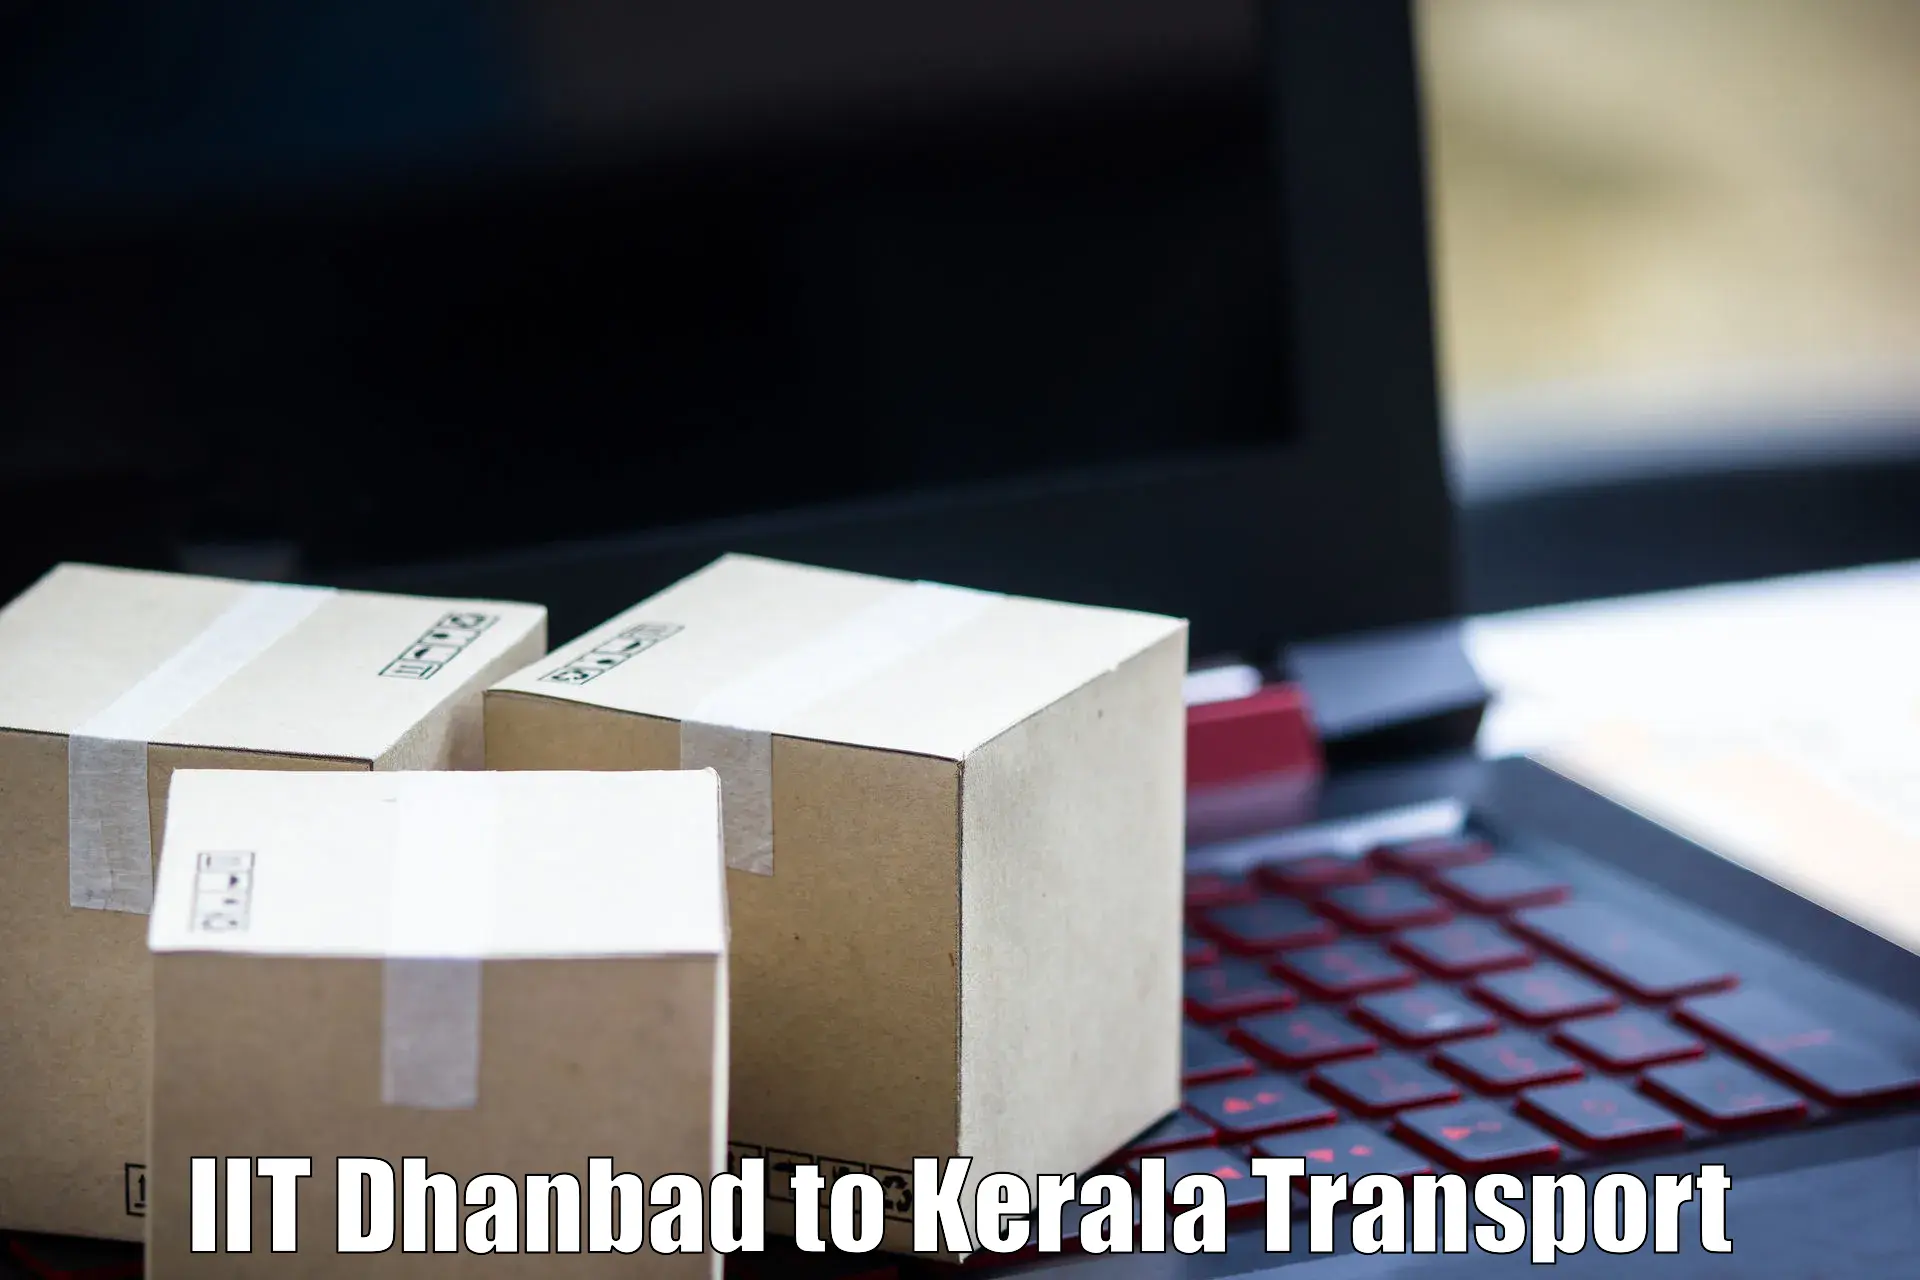 All India transport service IIT Dhanbad to Kollam